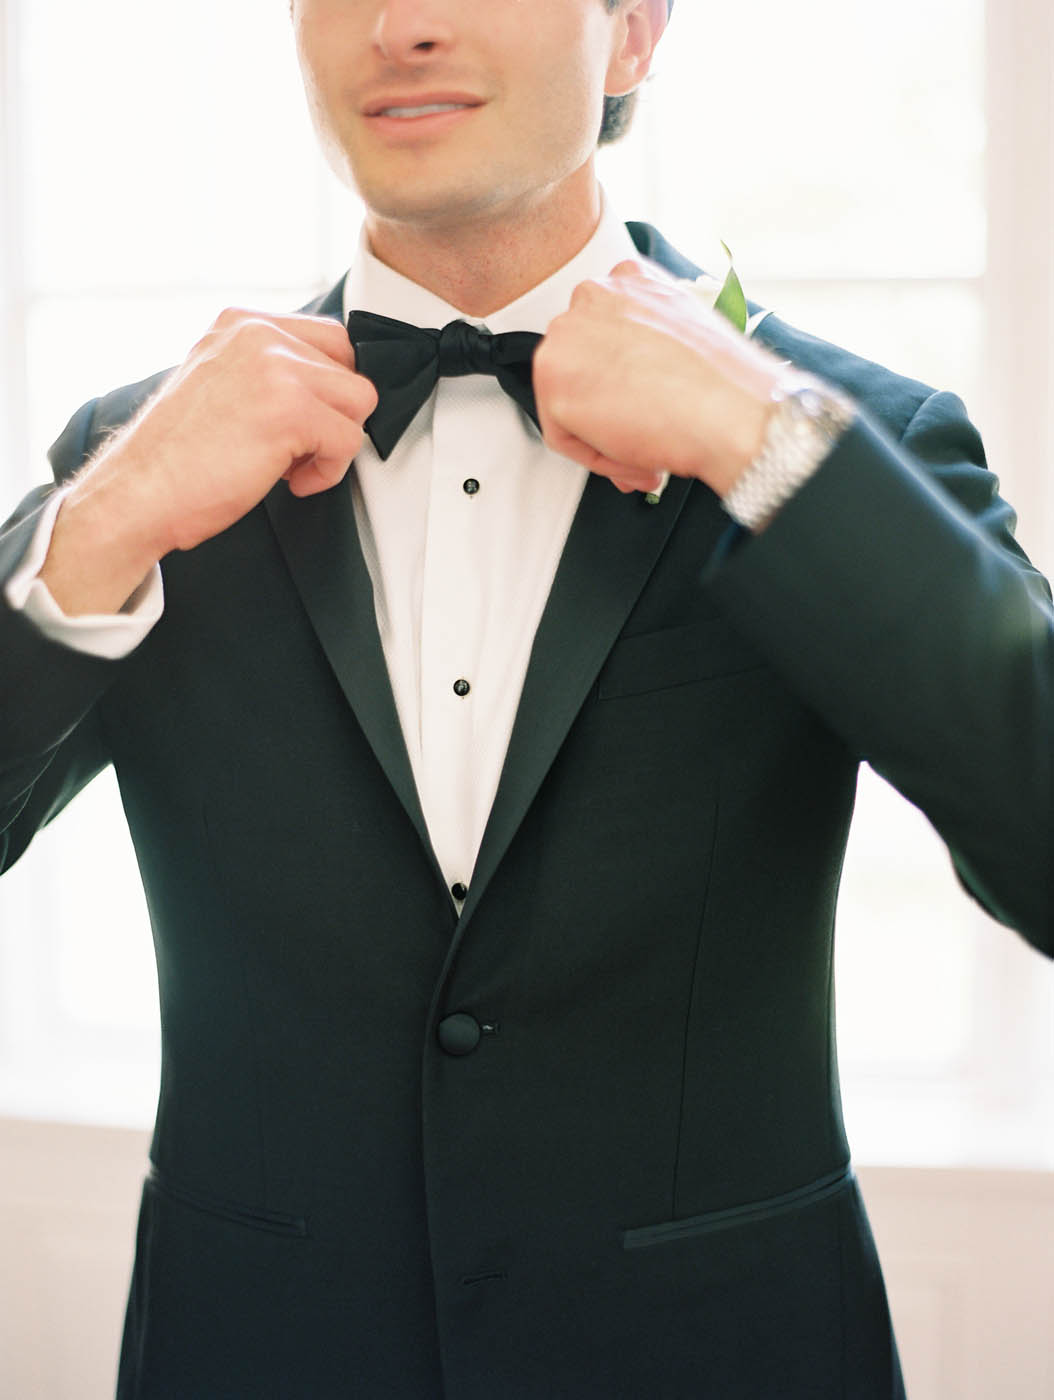 An up close shot of the groom tying his bow tie